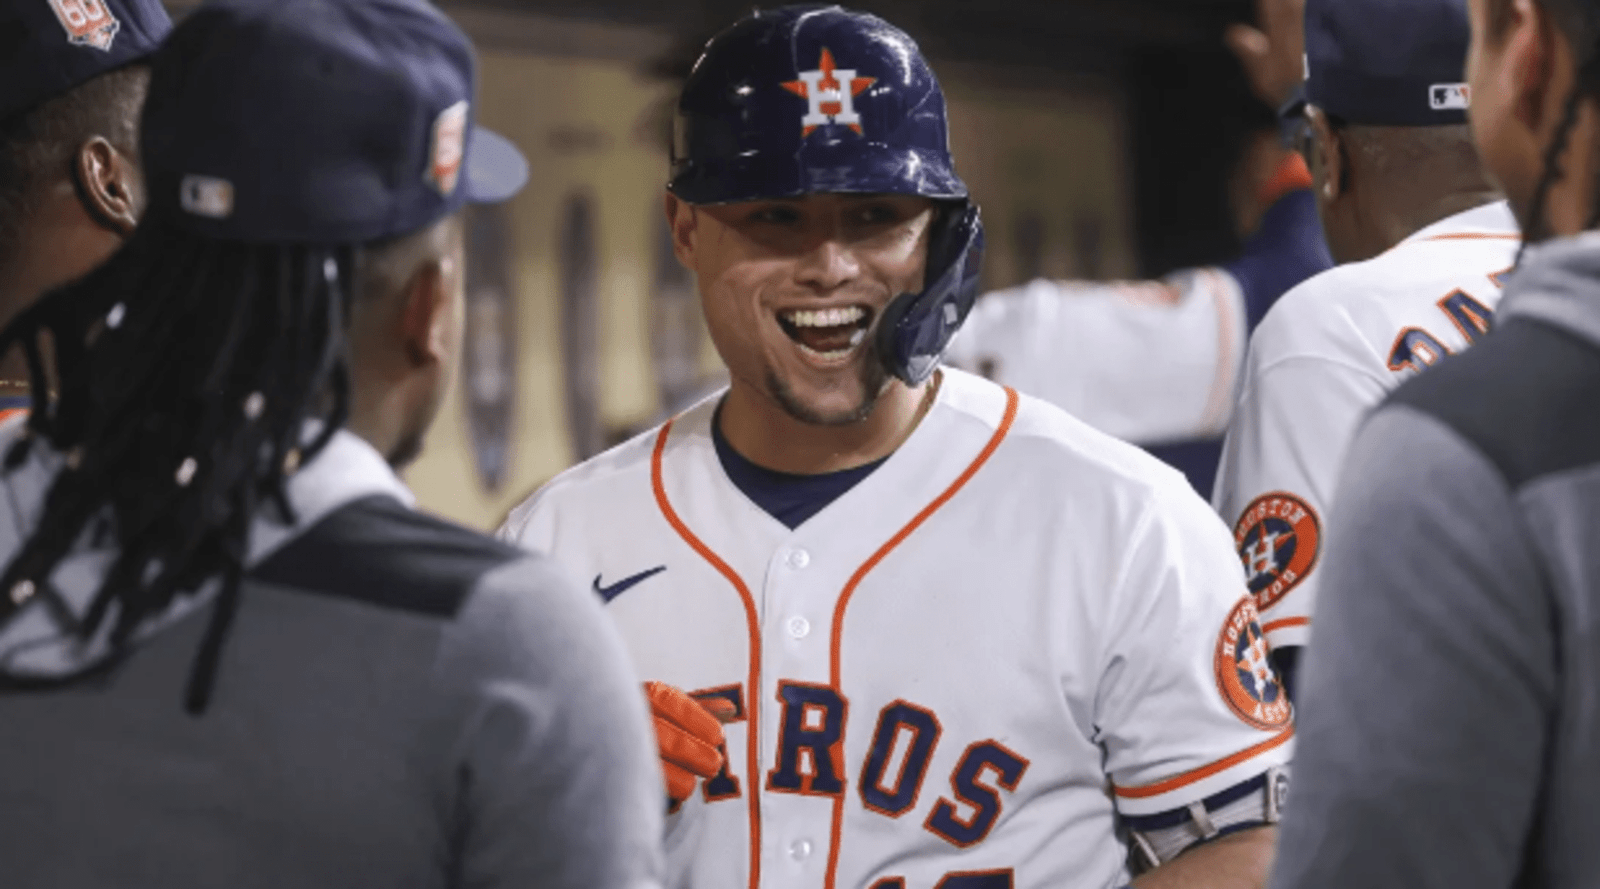 Astros Welcome Back Díaz: A Boost for the Lineup